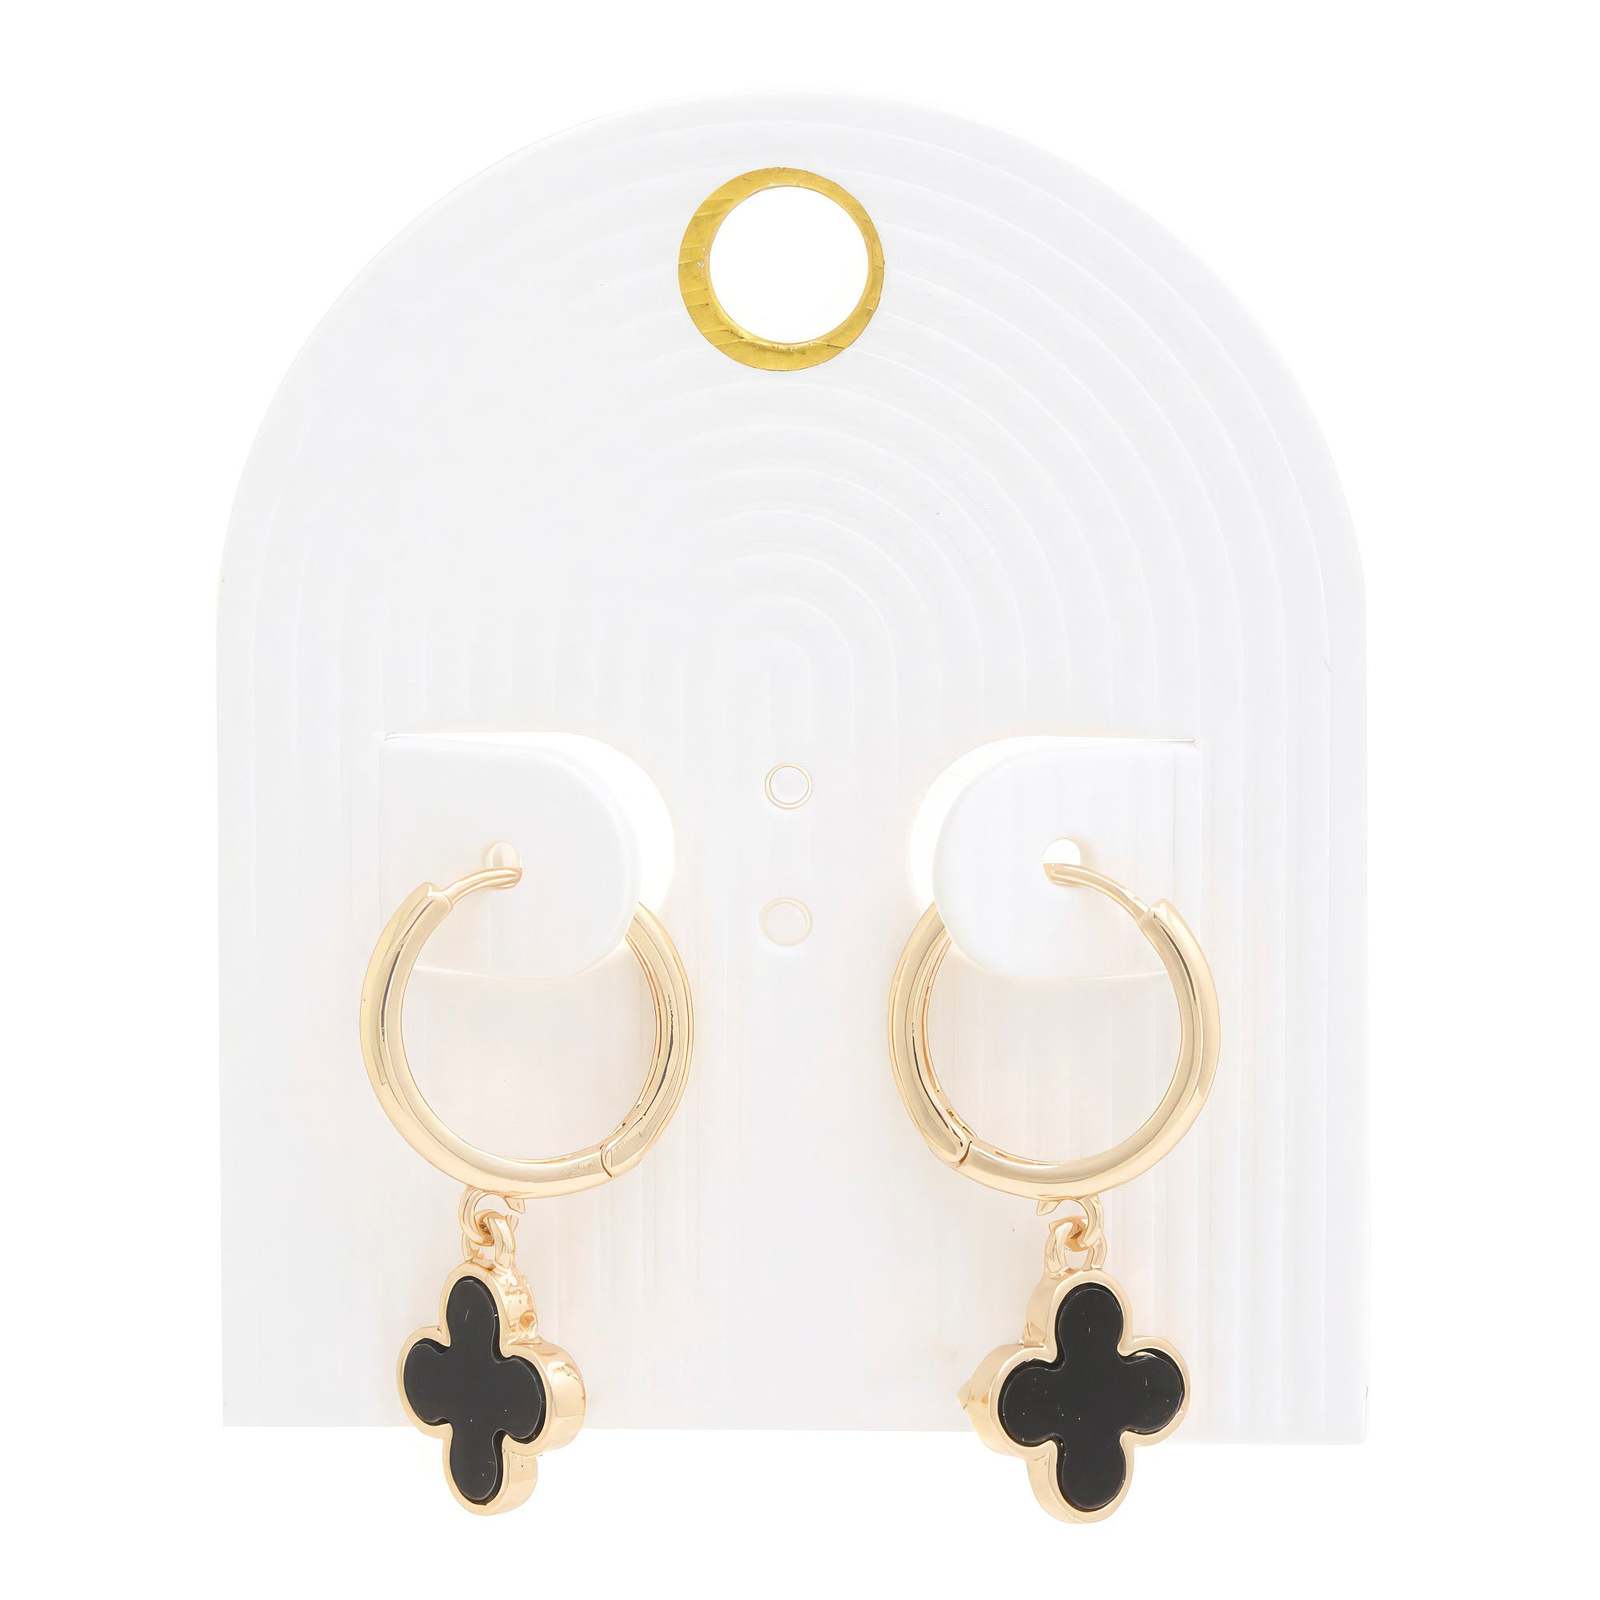 Primary image for Moroccan Shape Hoop Earring